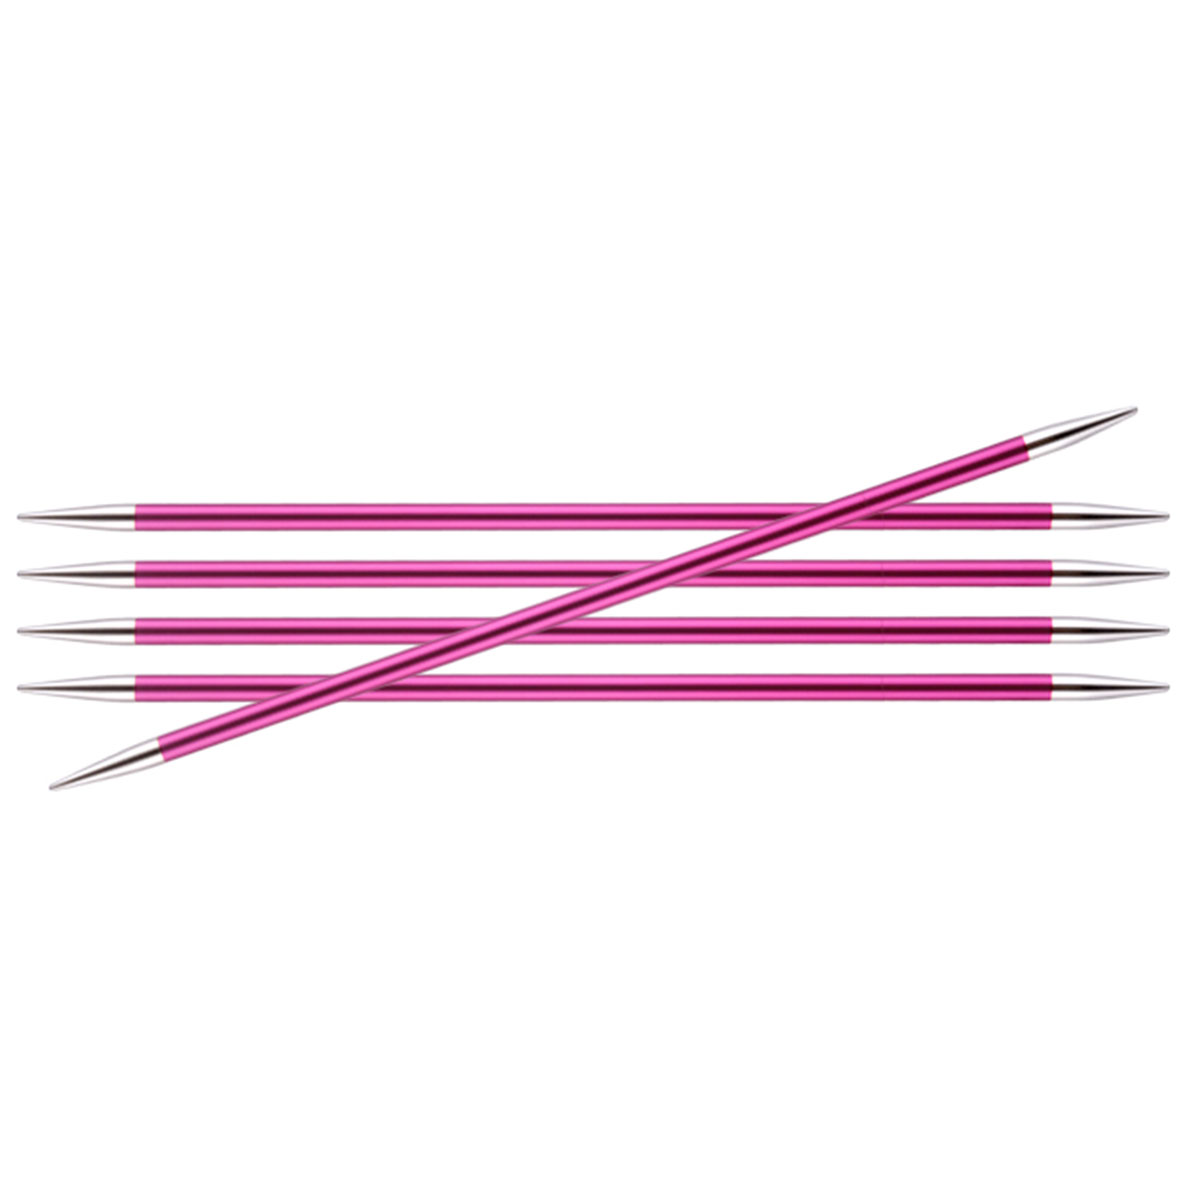 Knitter's Pride Zing Double Pointed Needles - US 8 (5.0mm) - 6